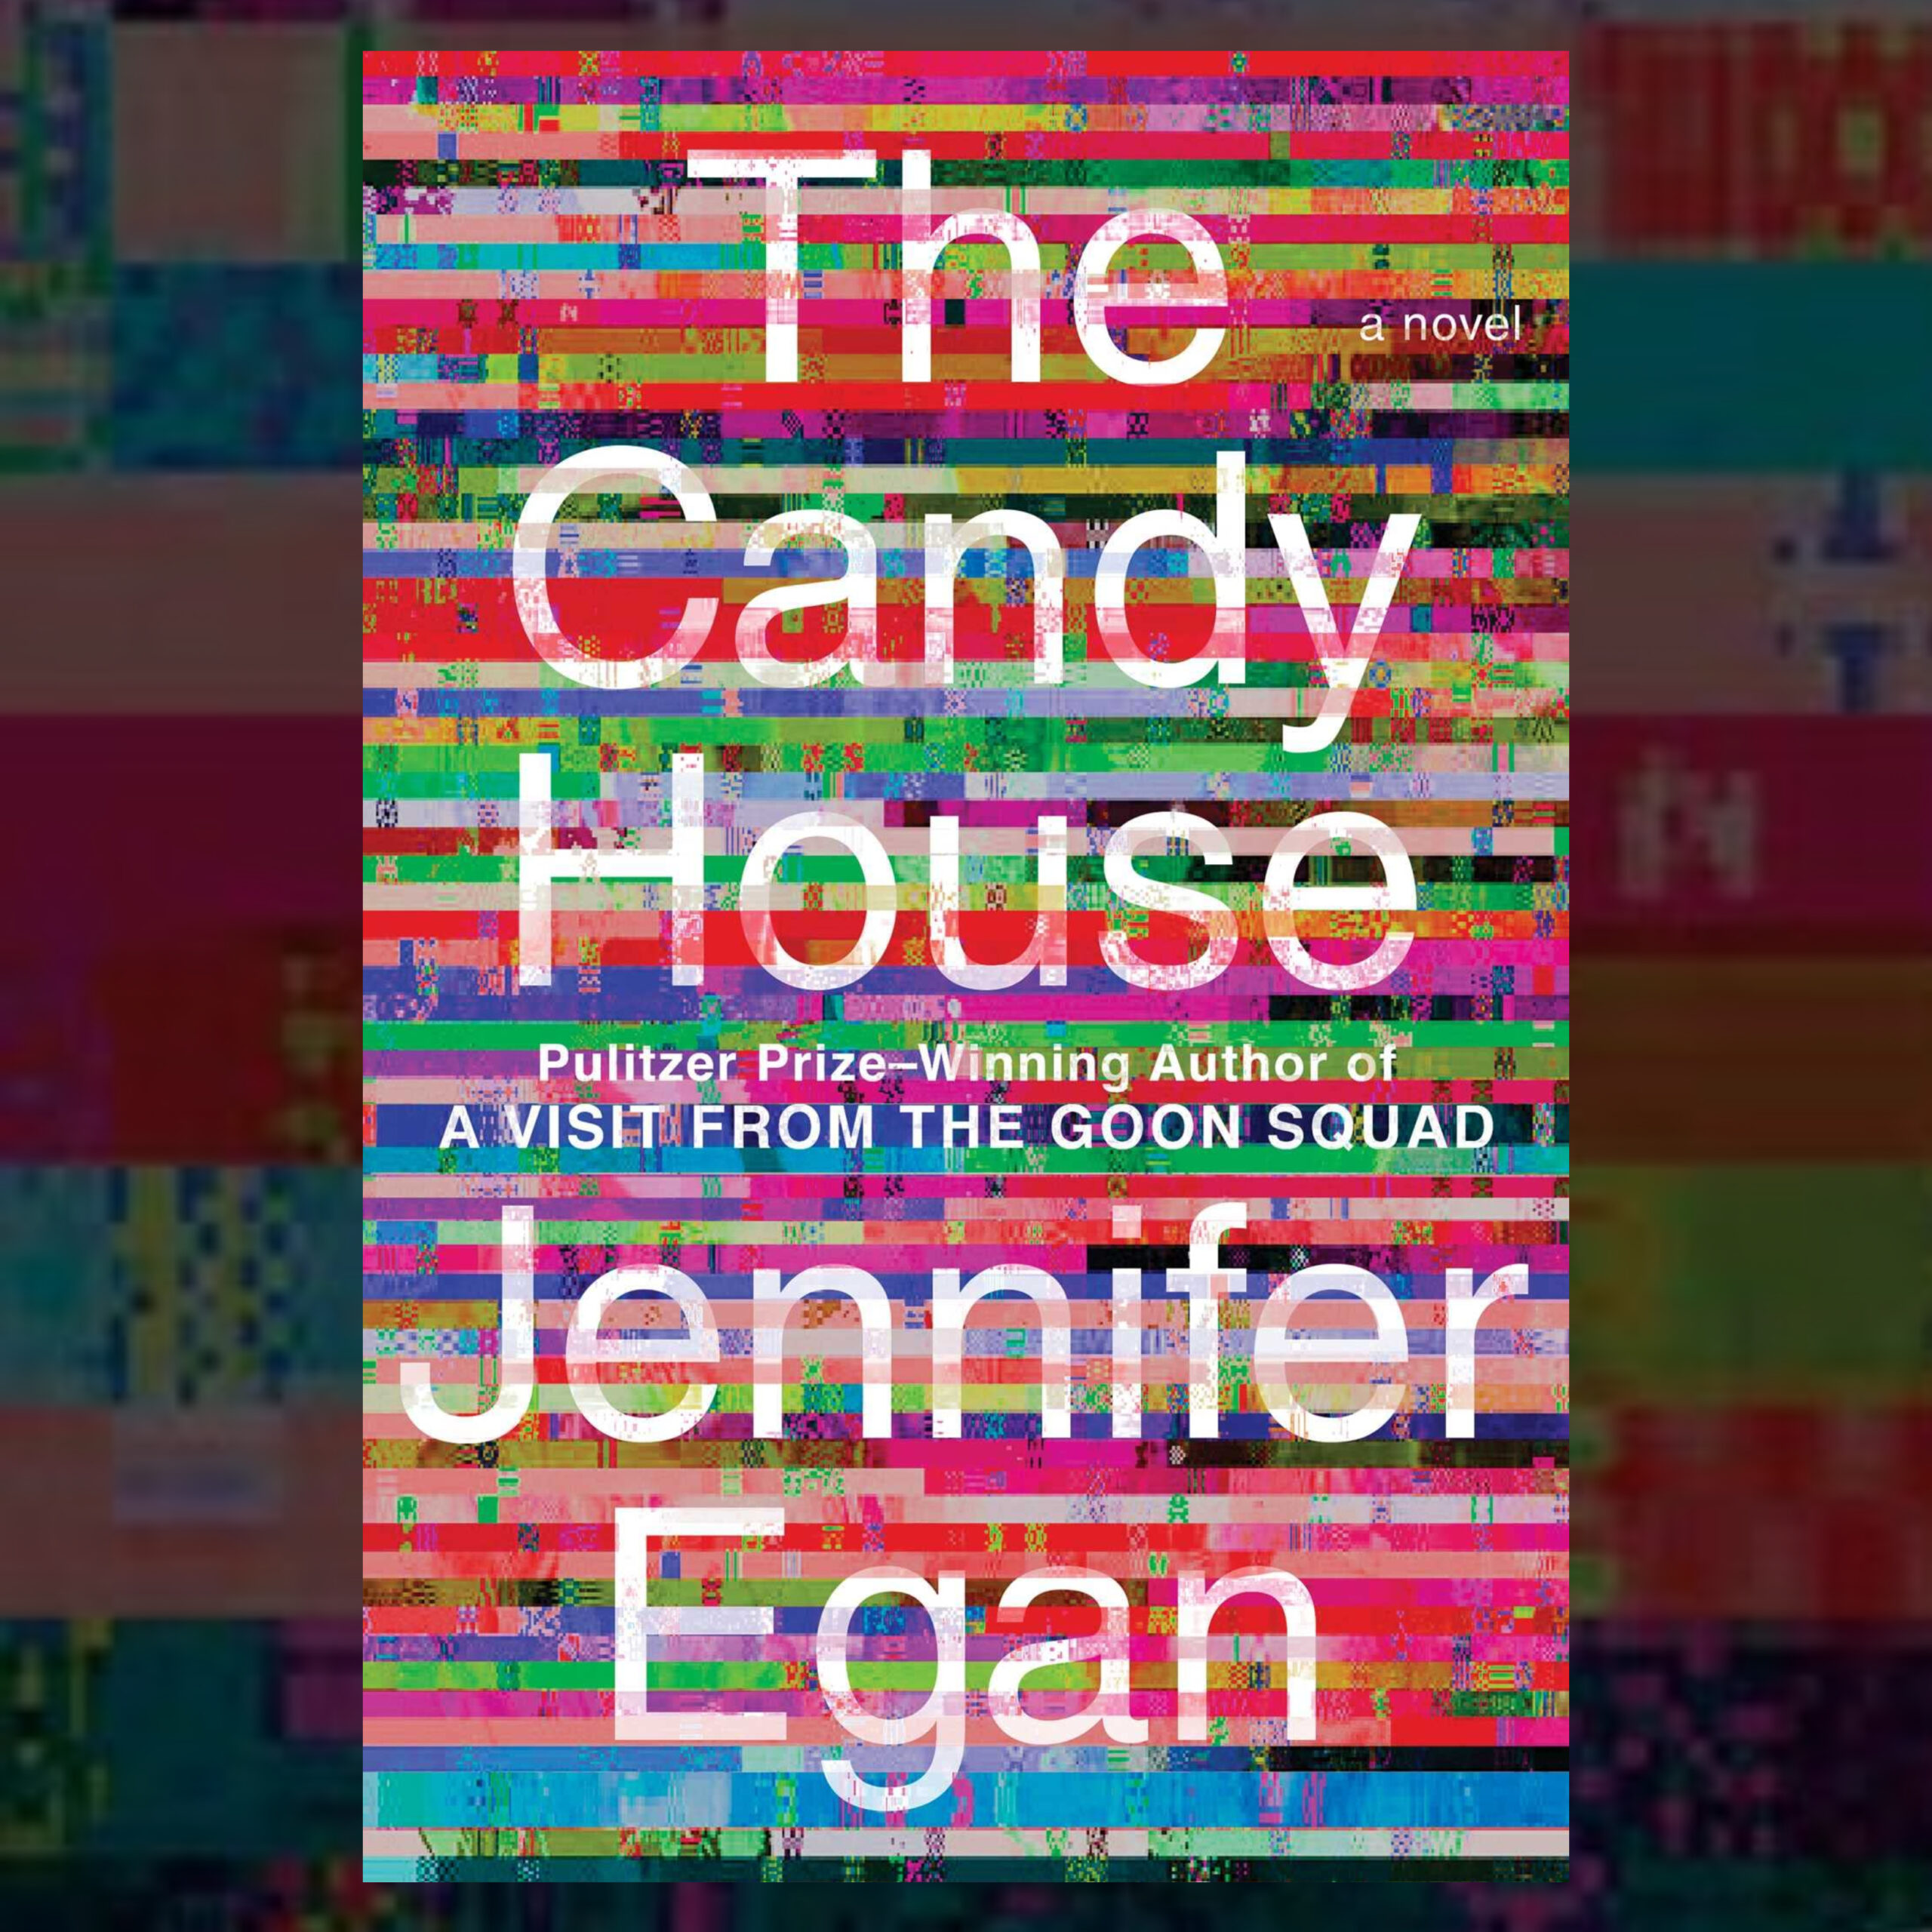 #1770 Jennifer Egan "The Candy House" | The Book Show